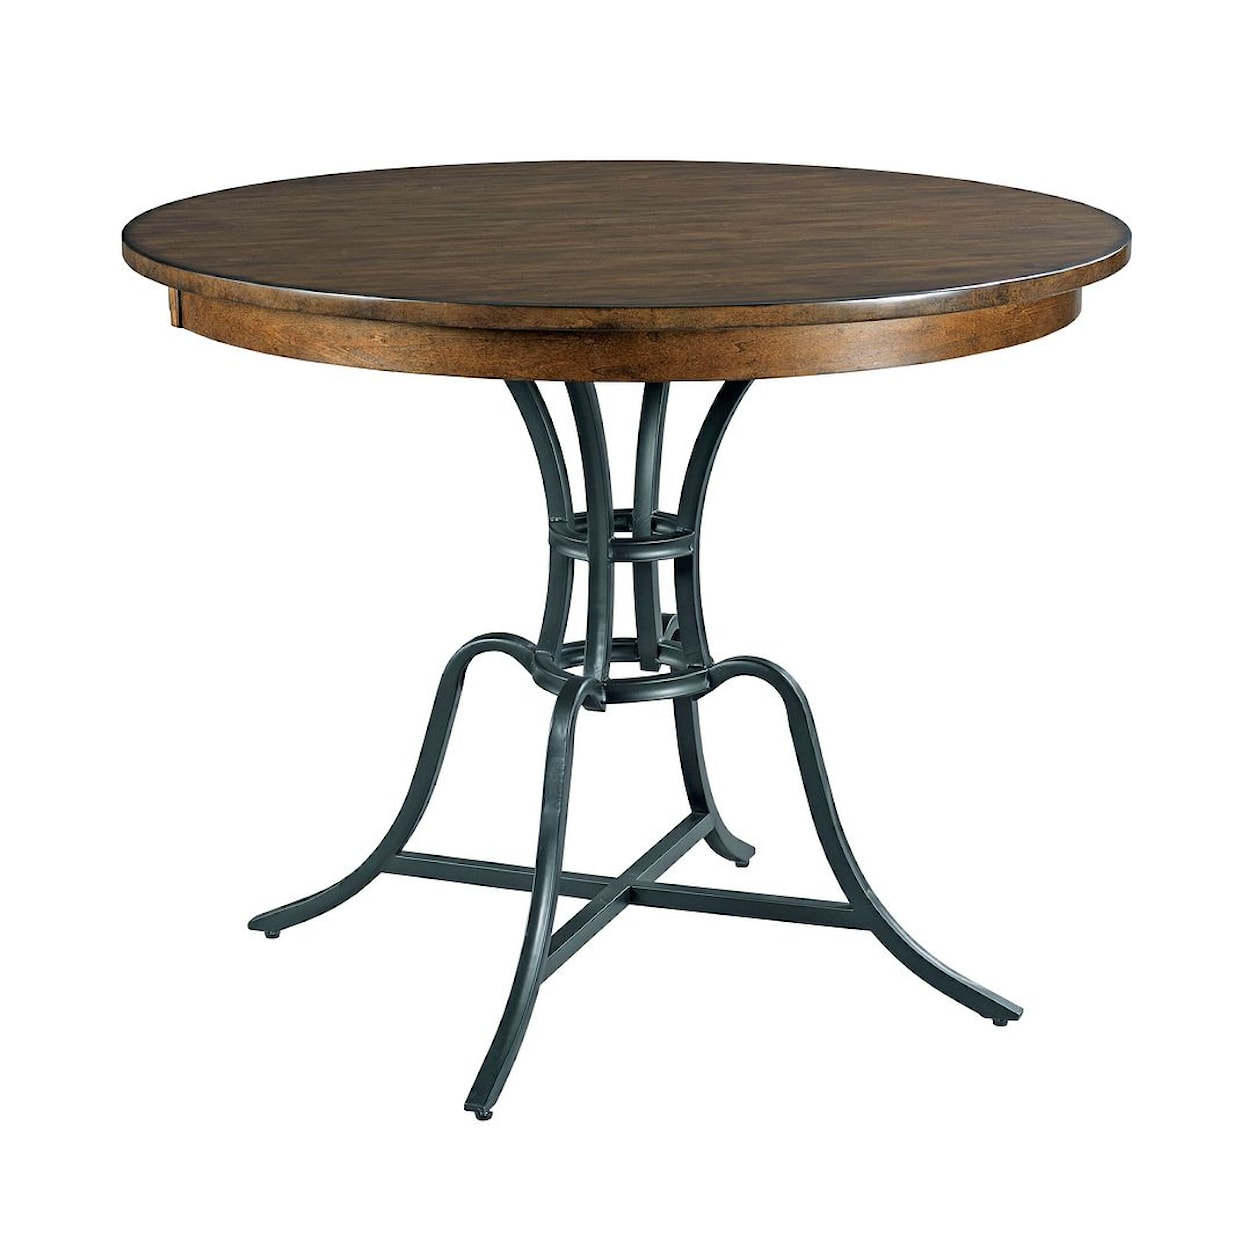 Kincaid Furniture The Nook 44" Round Counter Height Table w/ Metal Base